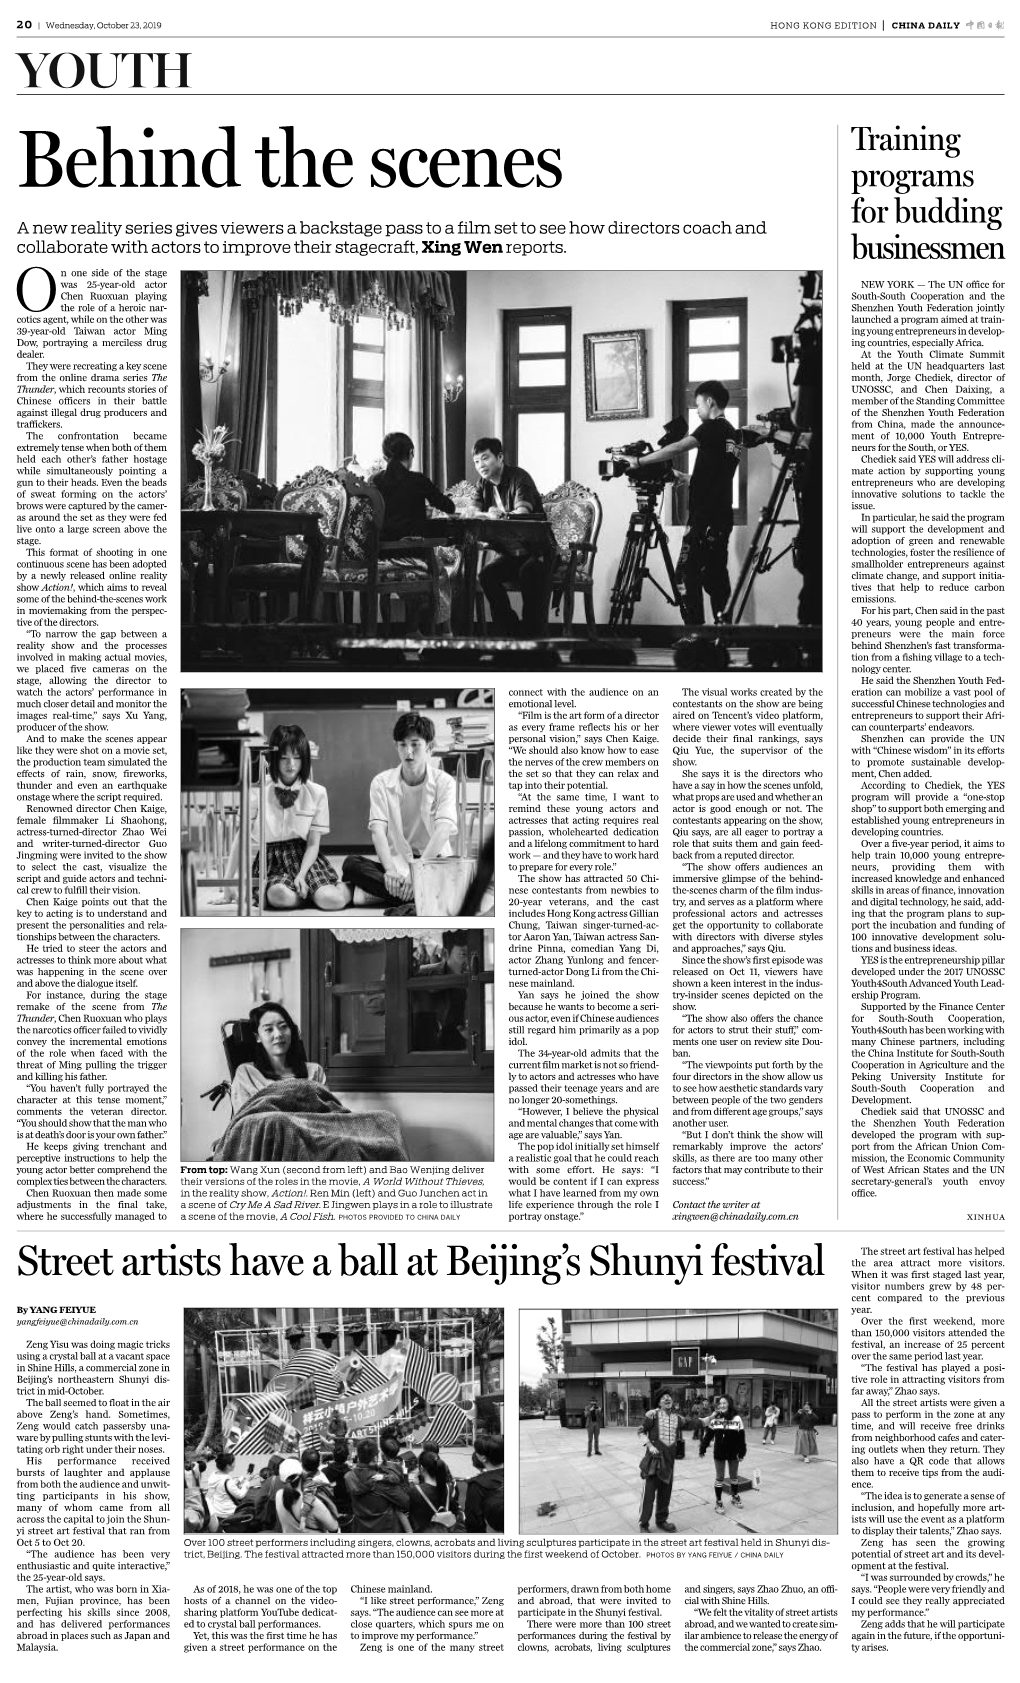 Street Artists Have a Ball at Beijing's Shunyi Festival